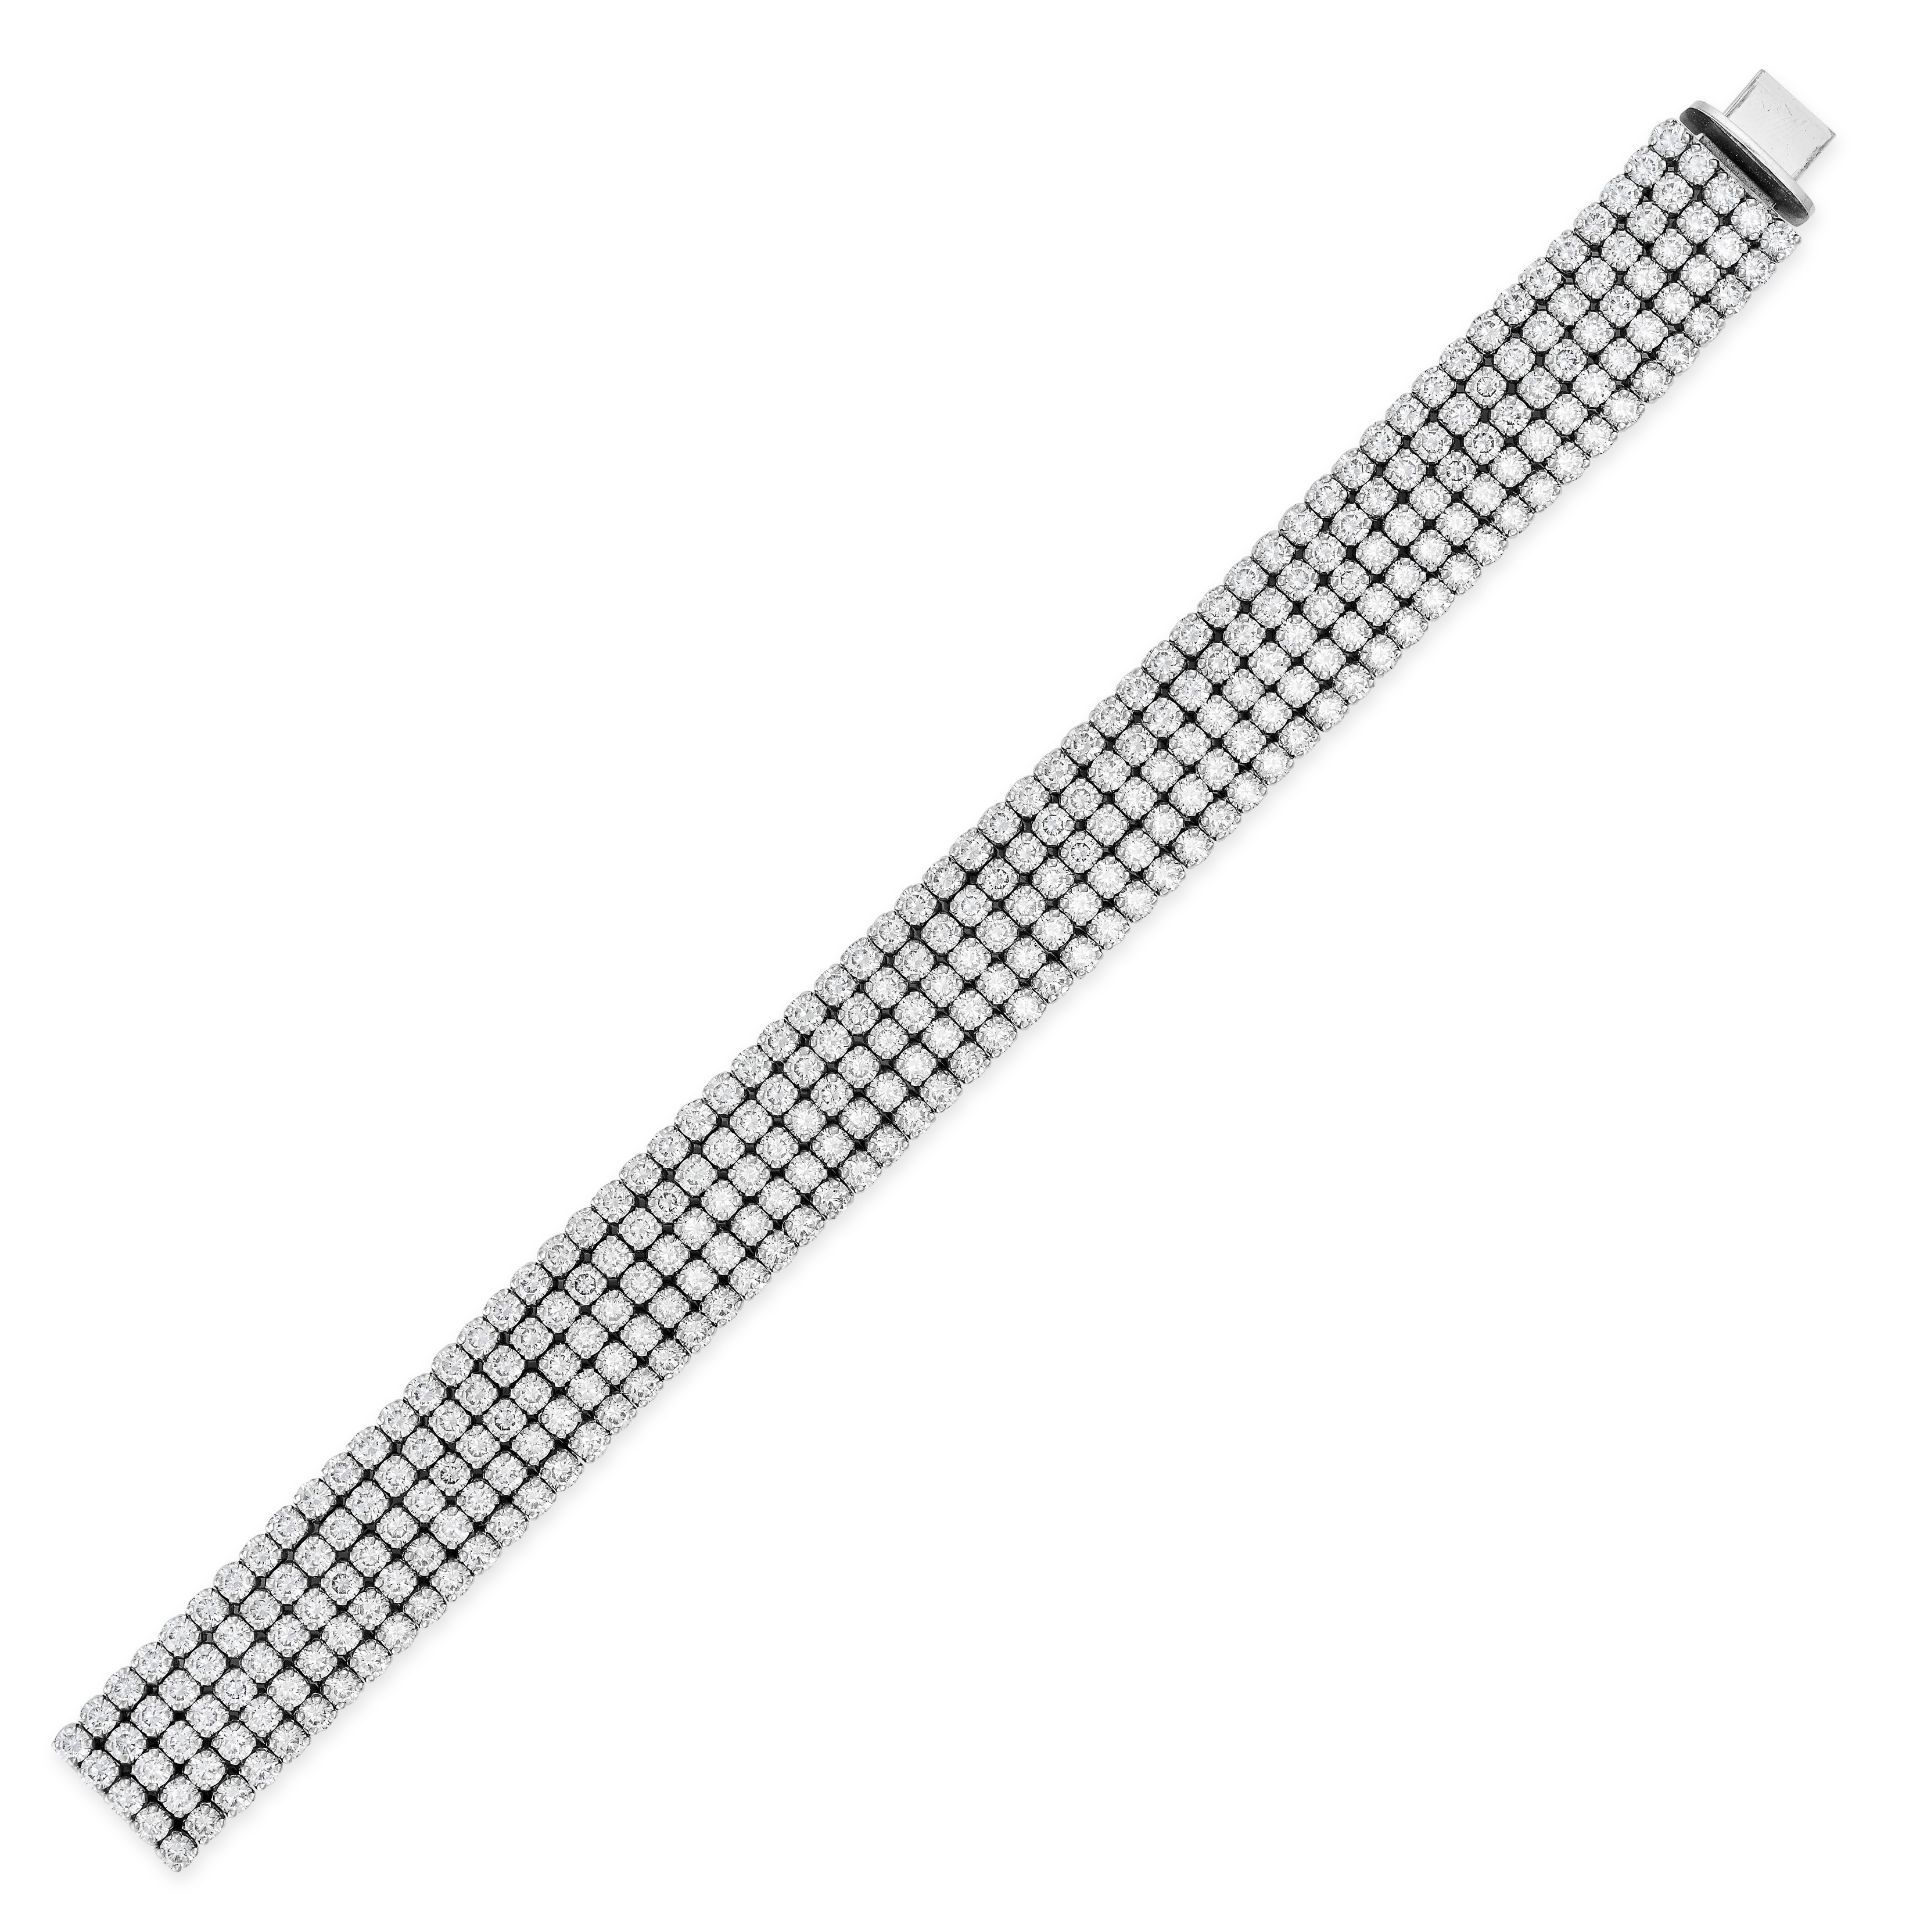 A DIAMOND BRACELET in 18ct white gold, set with five rows of round brilliant cut diamonds, the